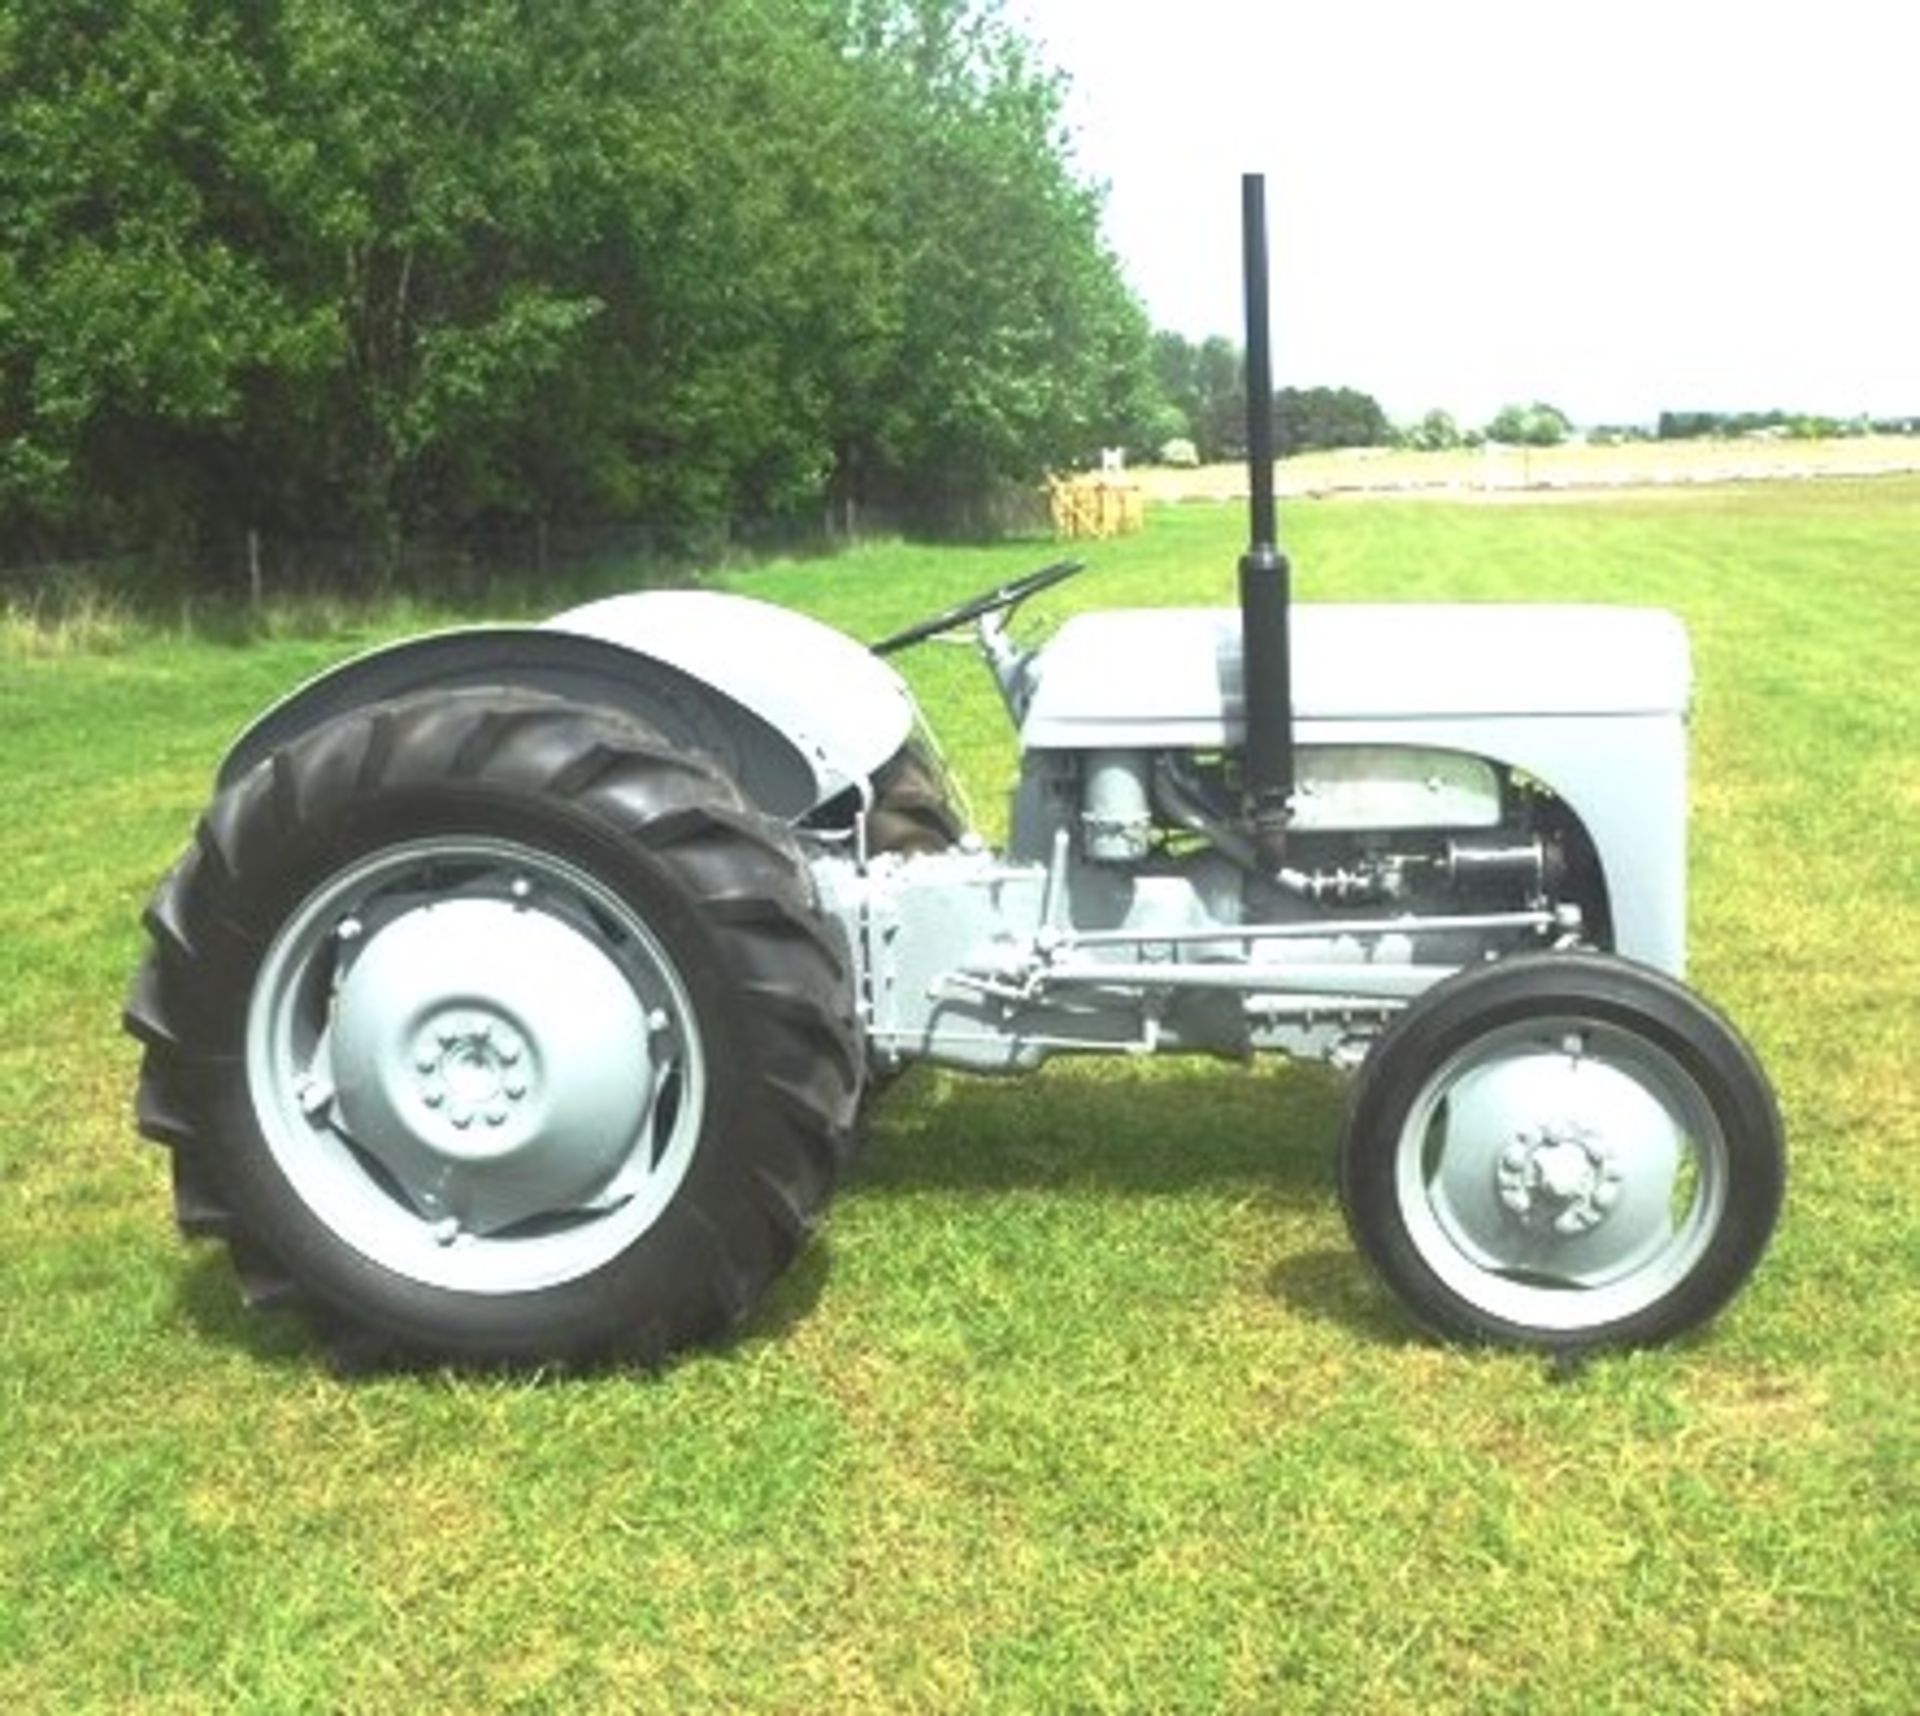 1951 MASSEY FERGUSON TED20 PETROL TRACTOR (GREY) MILEAGE NOT KNOWN - NO DIAL - Image 7 of 12